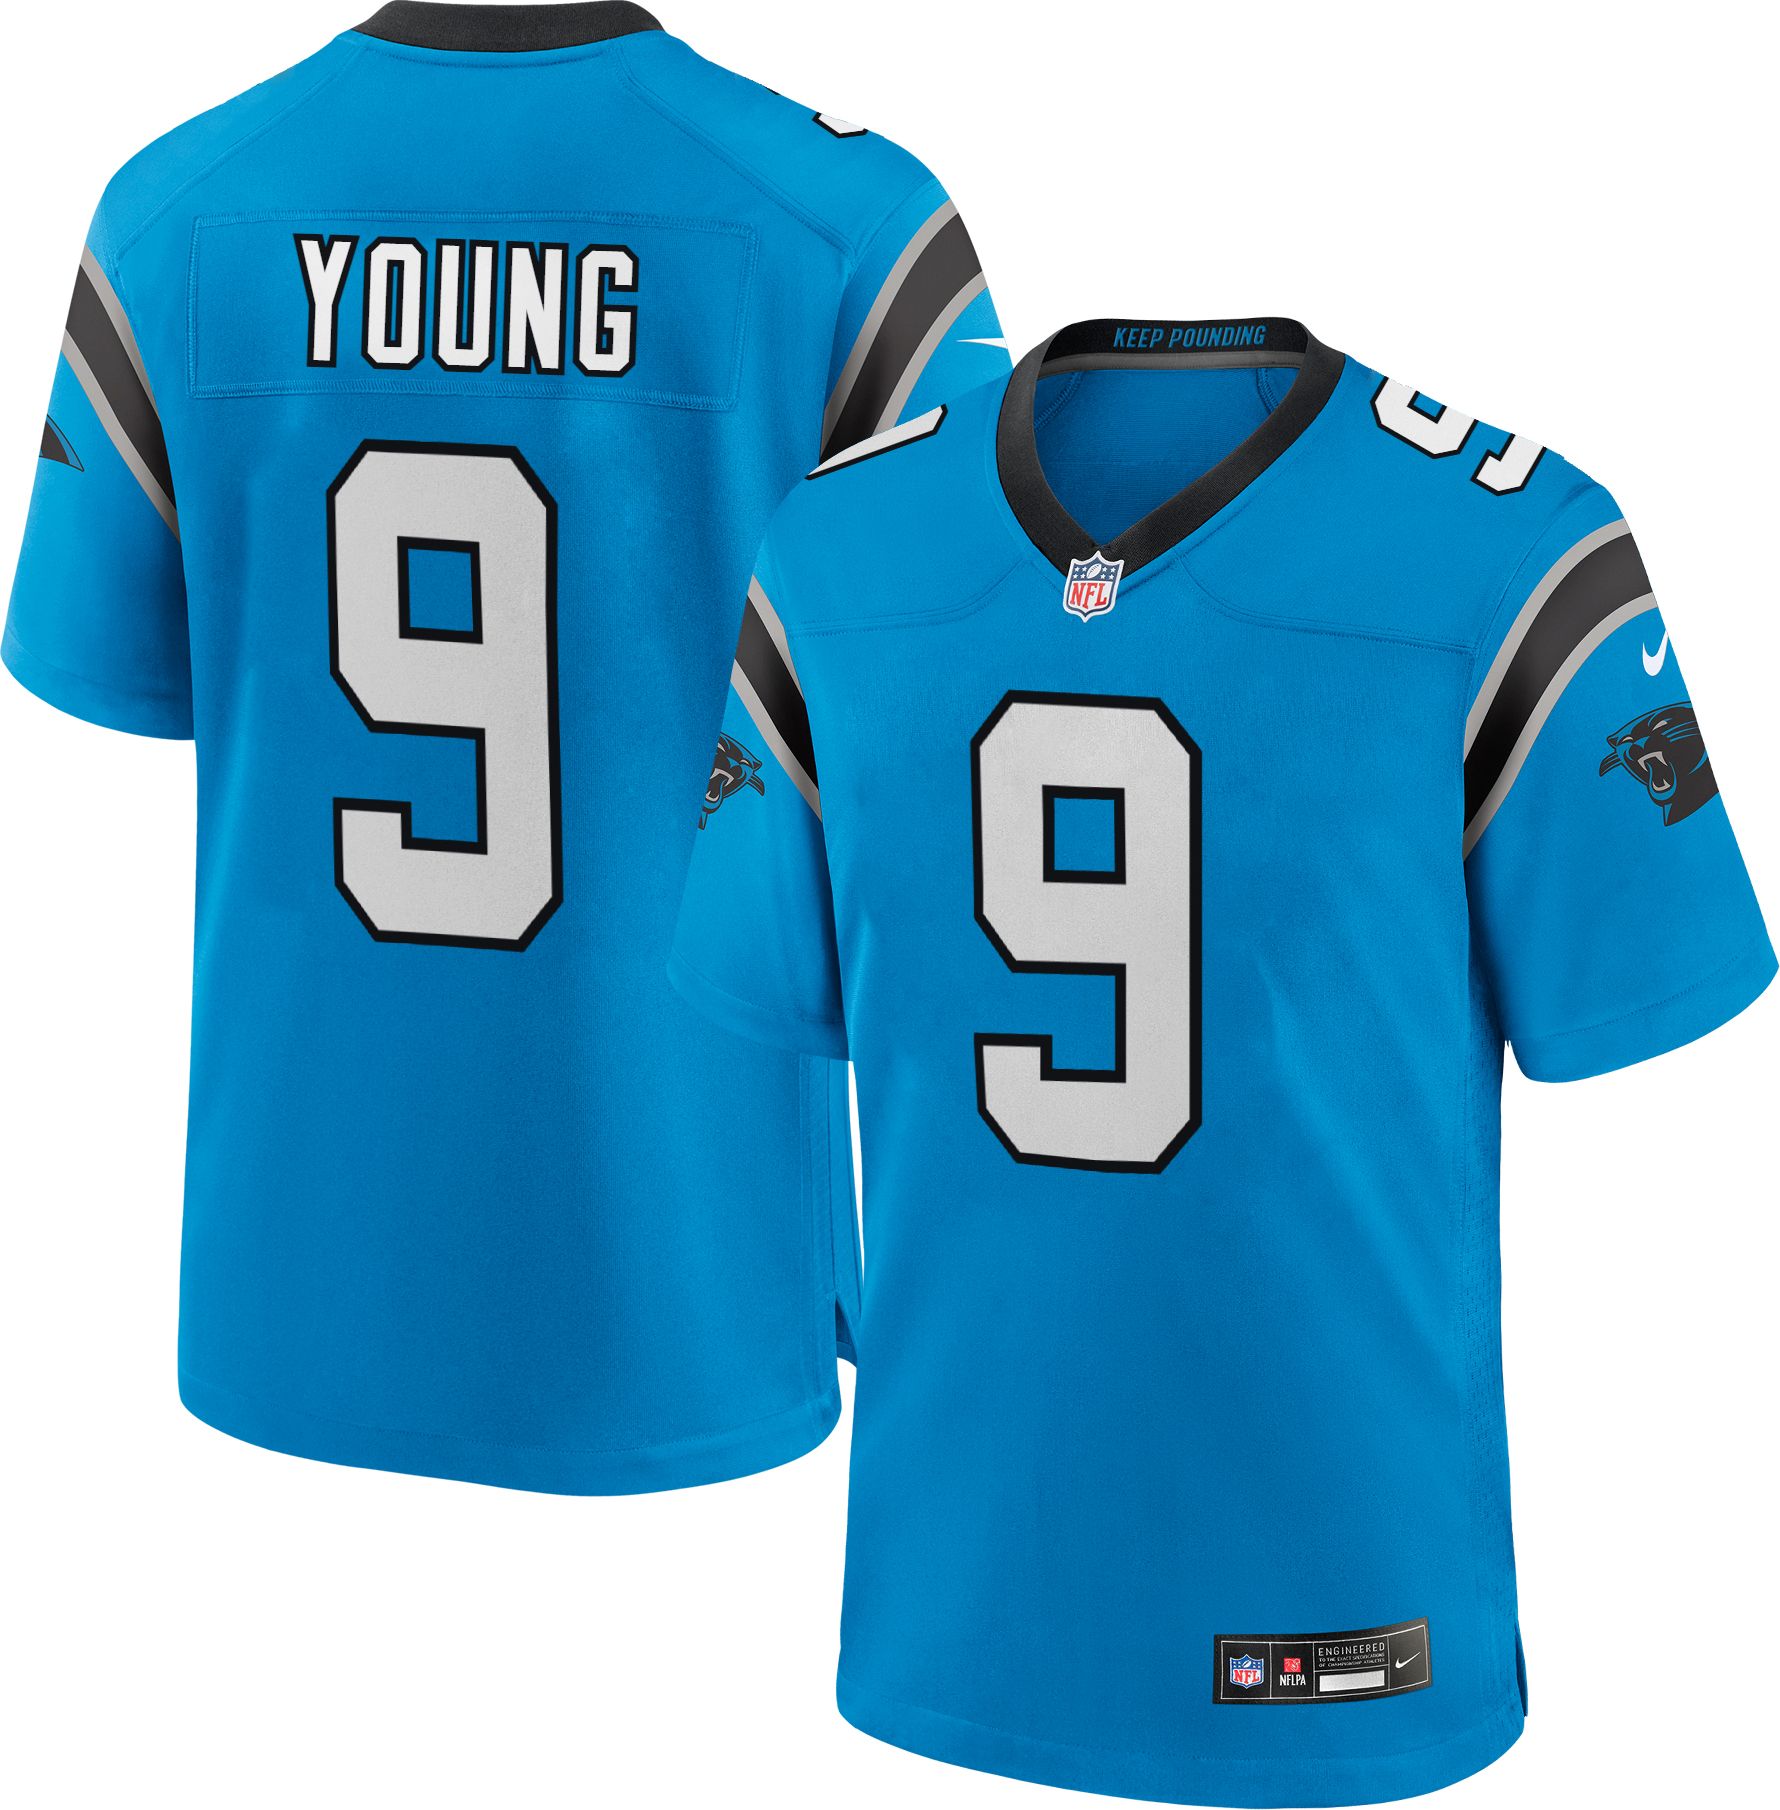 Panthers legend jersey